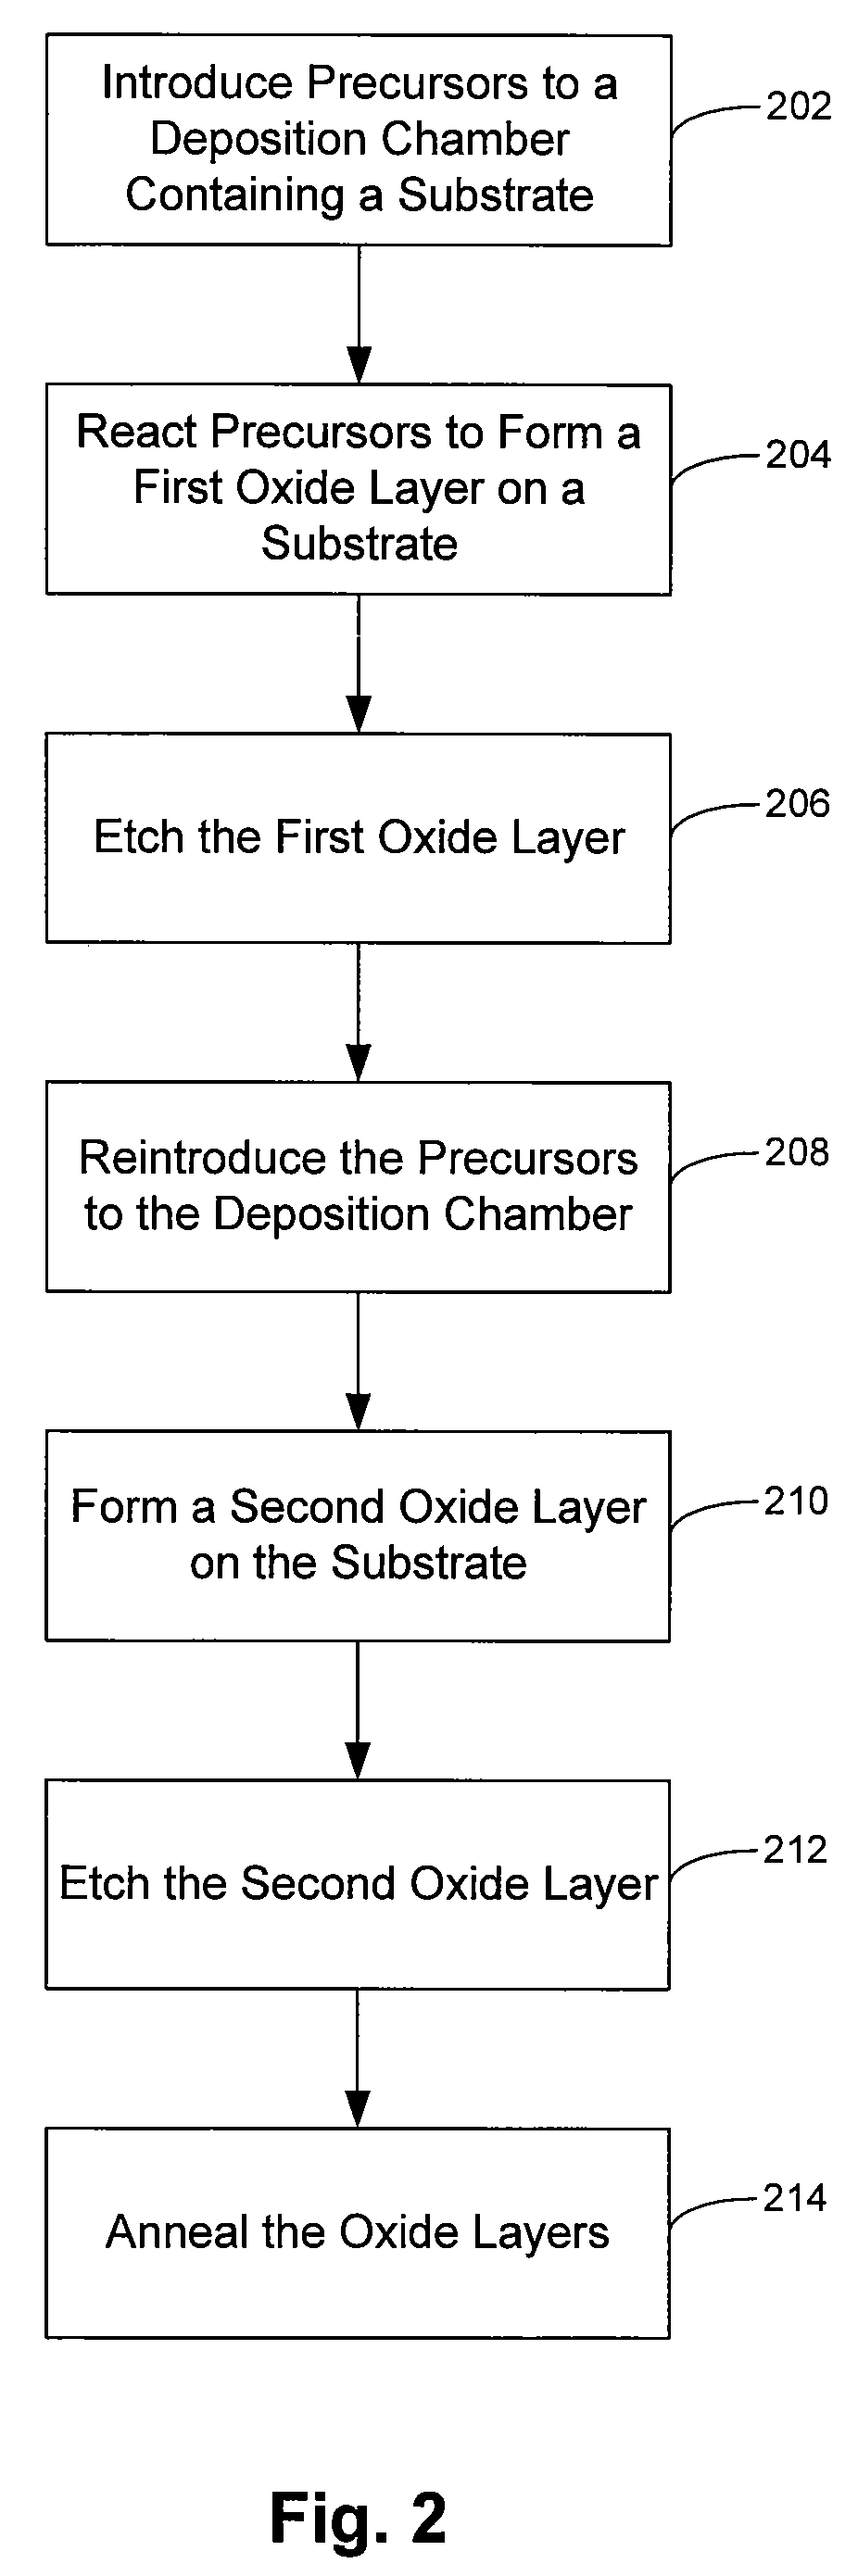 Deposition-plasma cure cycle process to enhance film quality of silicon dioxide